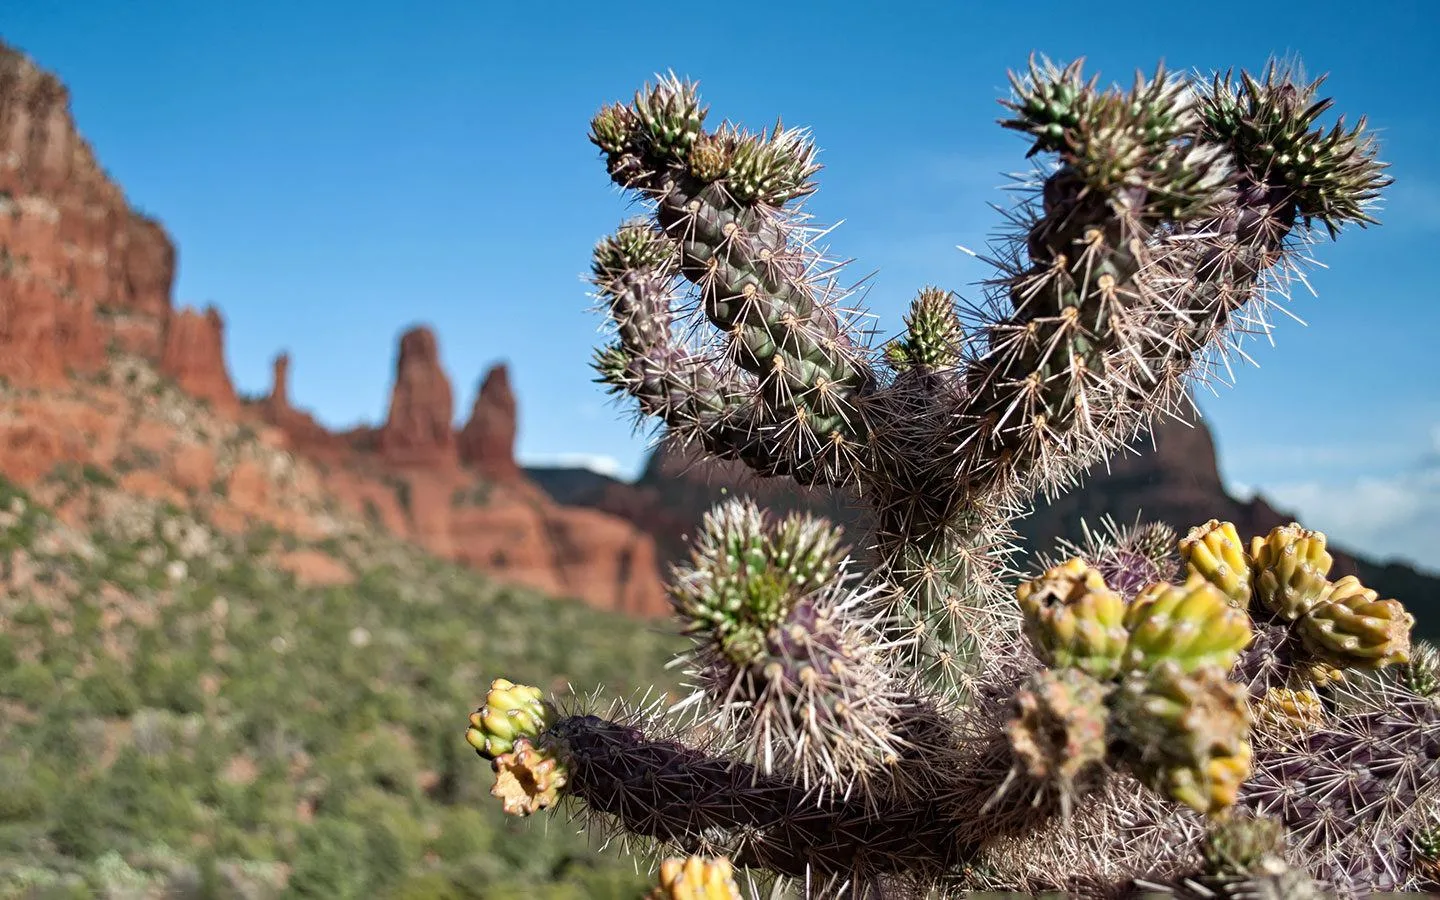 Cactus in front of red rocks in Arizona